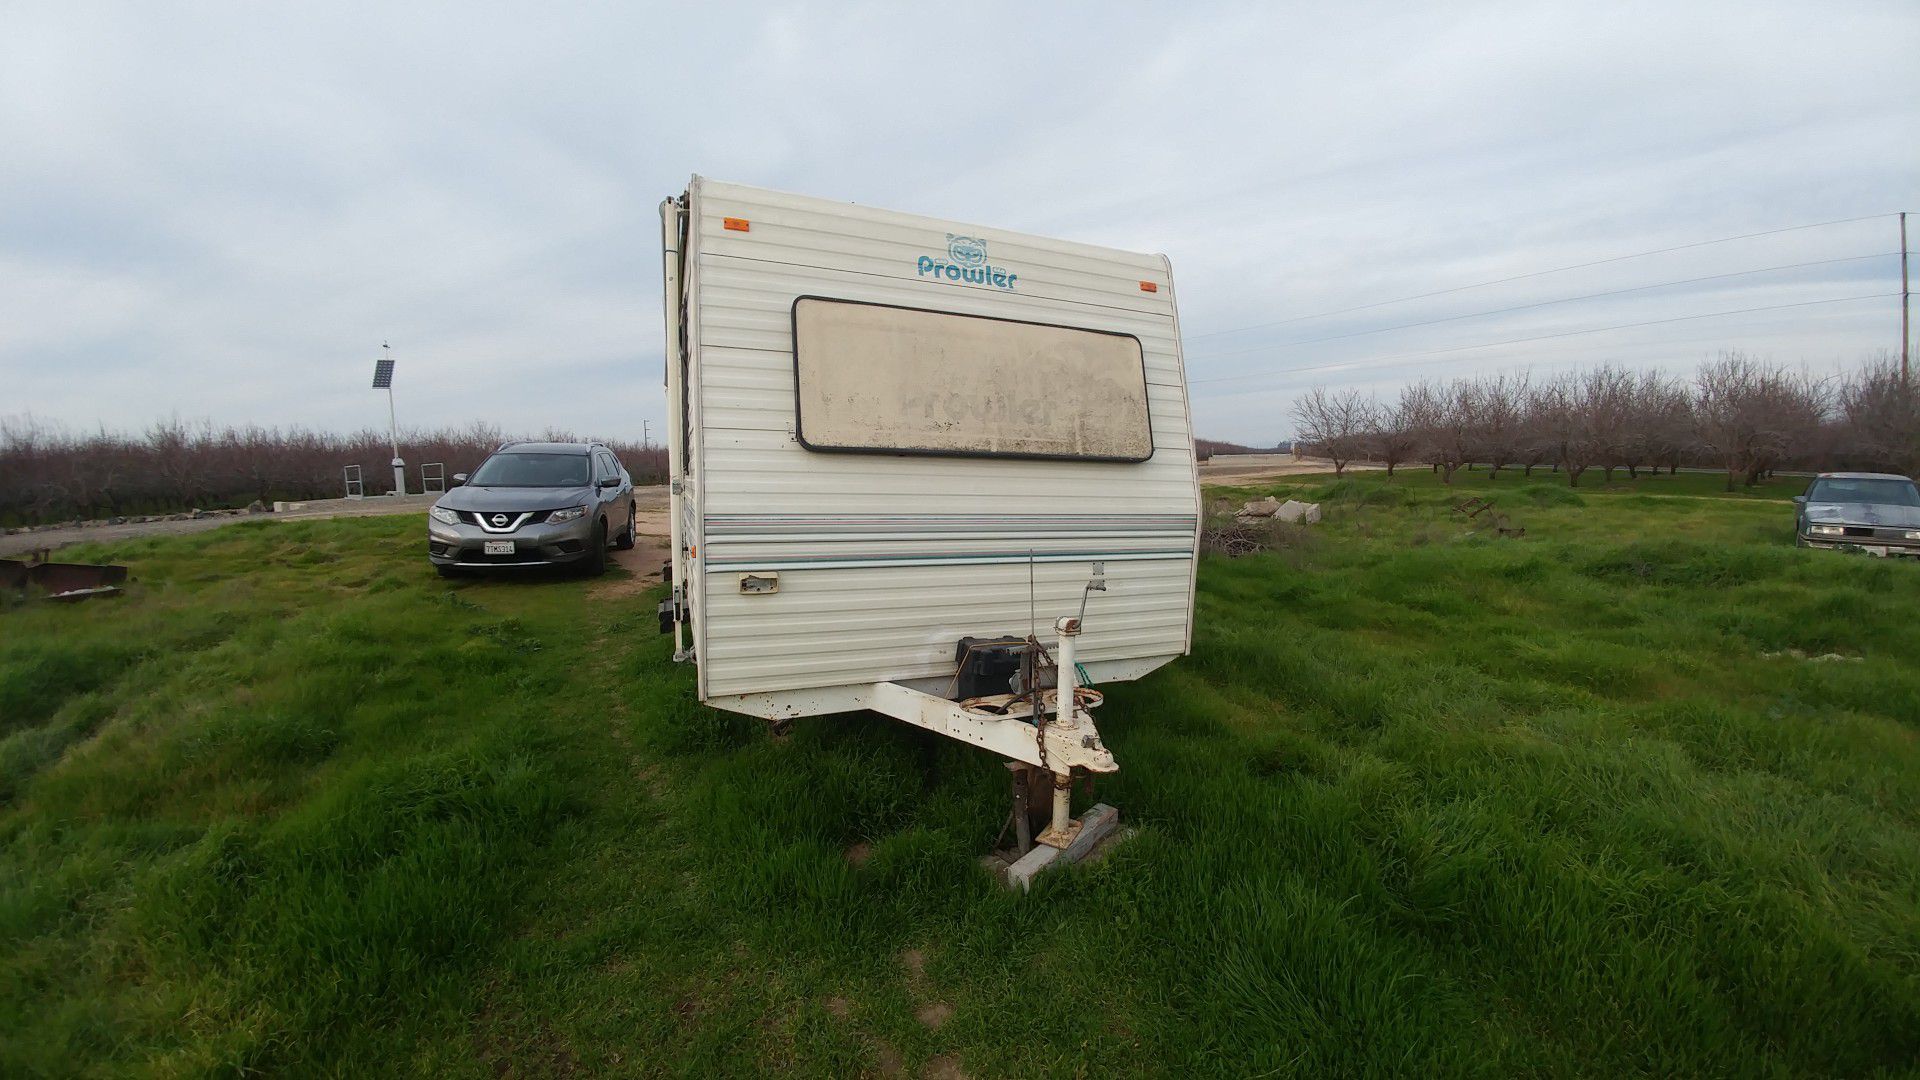 1993 TRAVEL TRAILER CASH ONLY